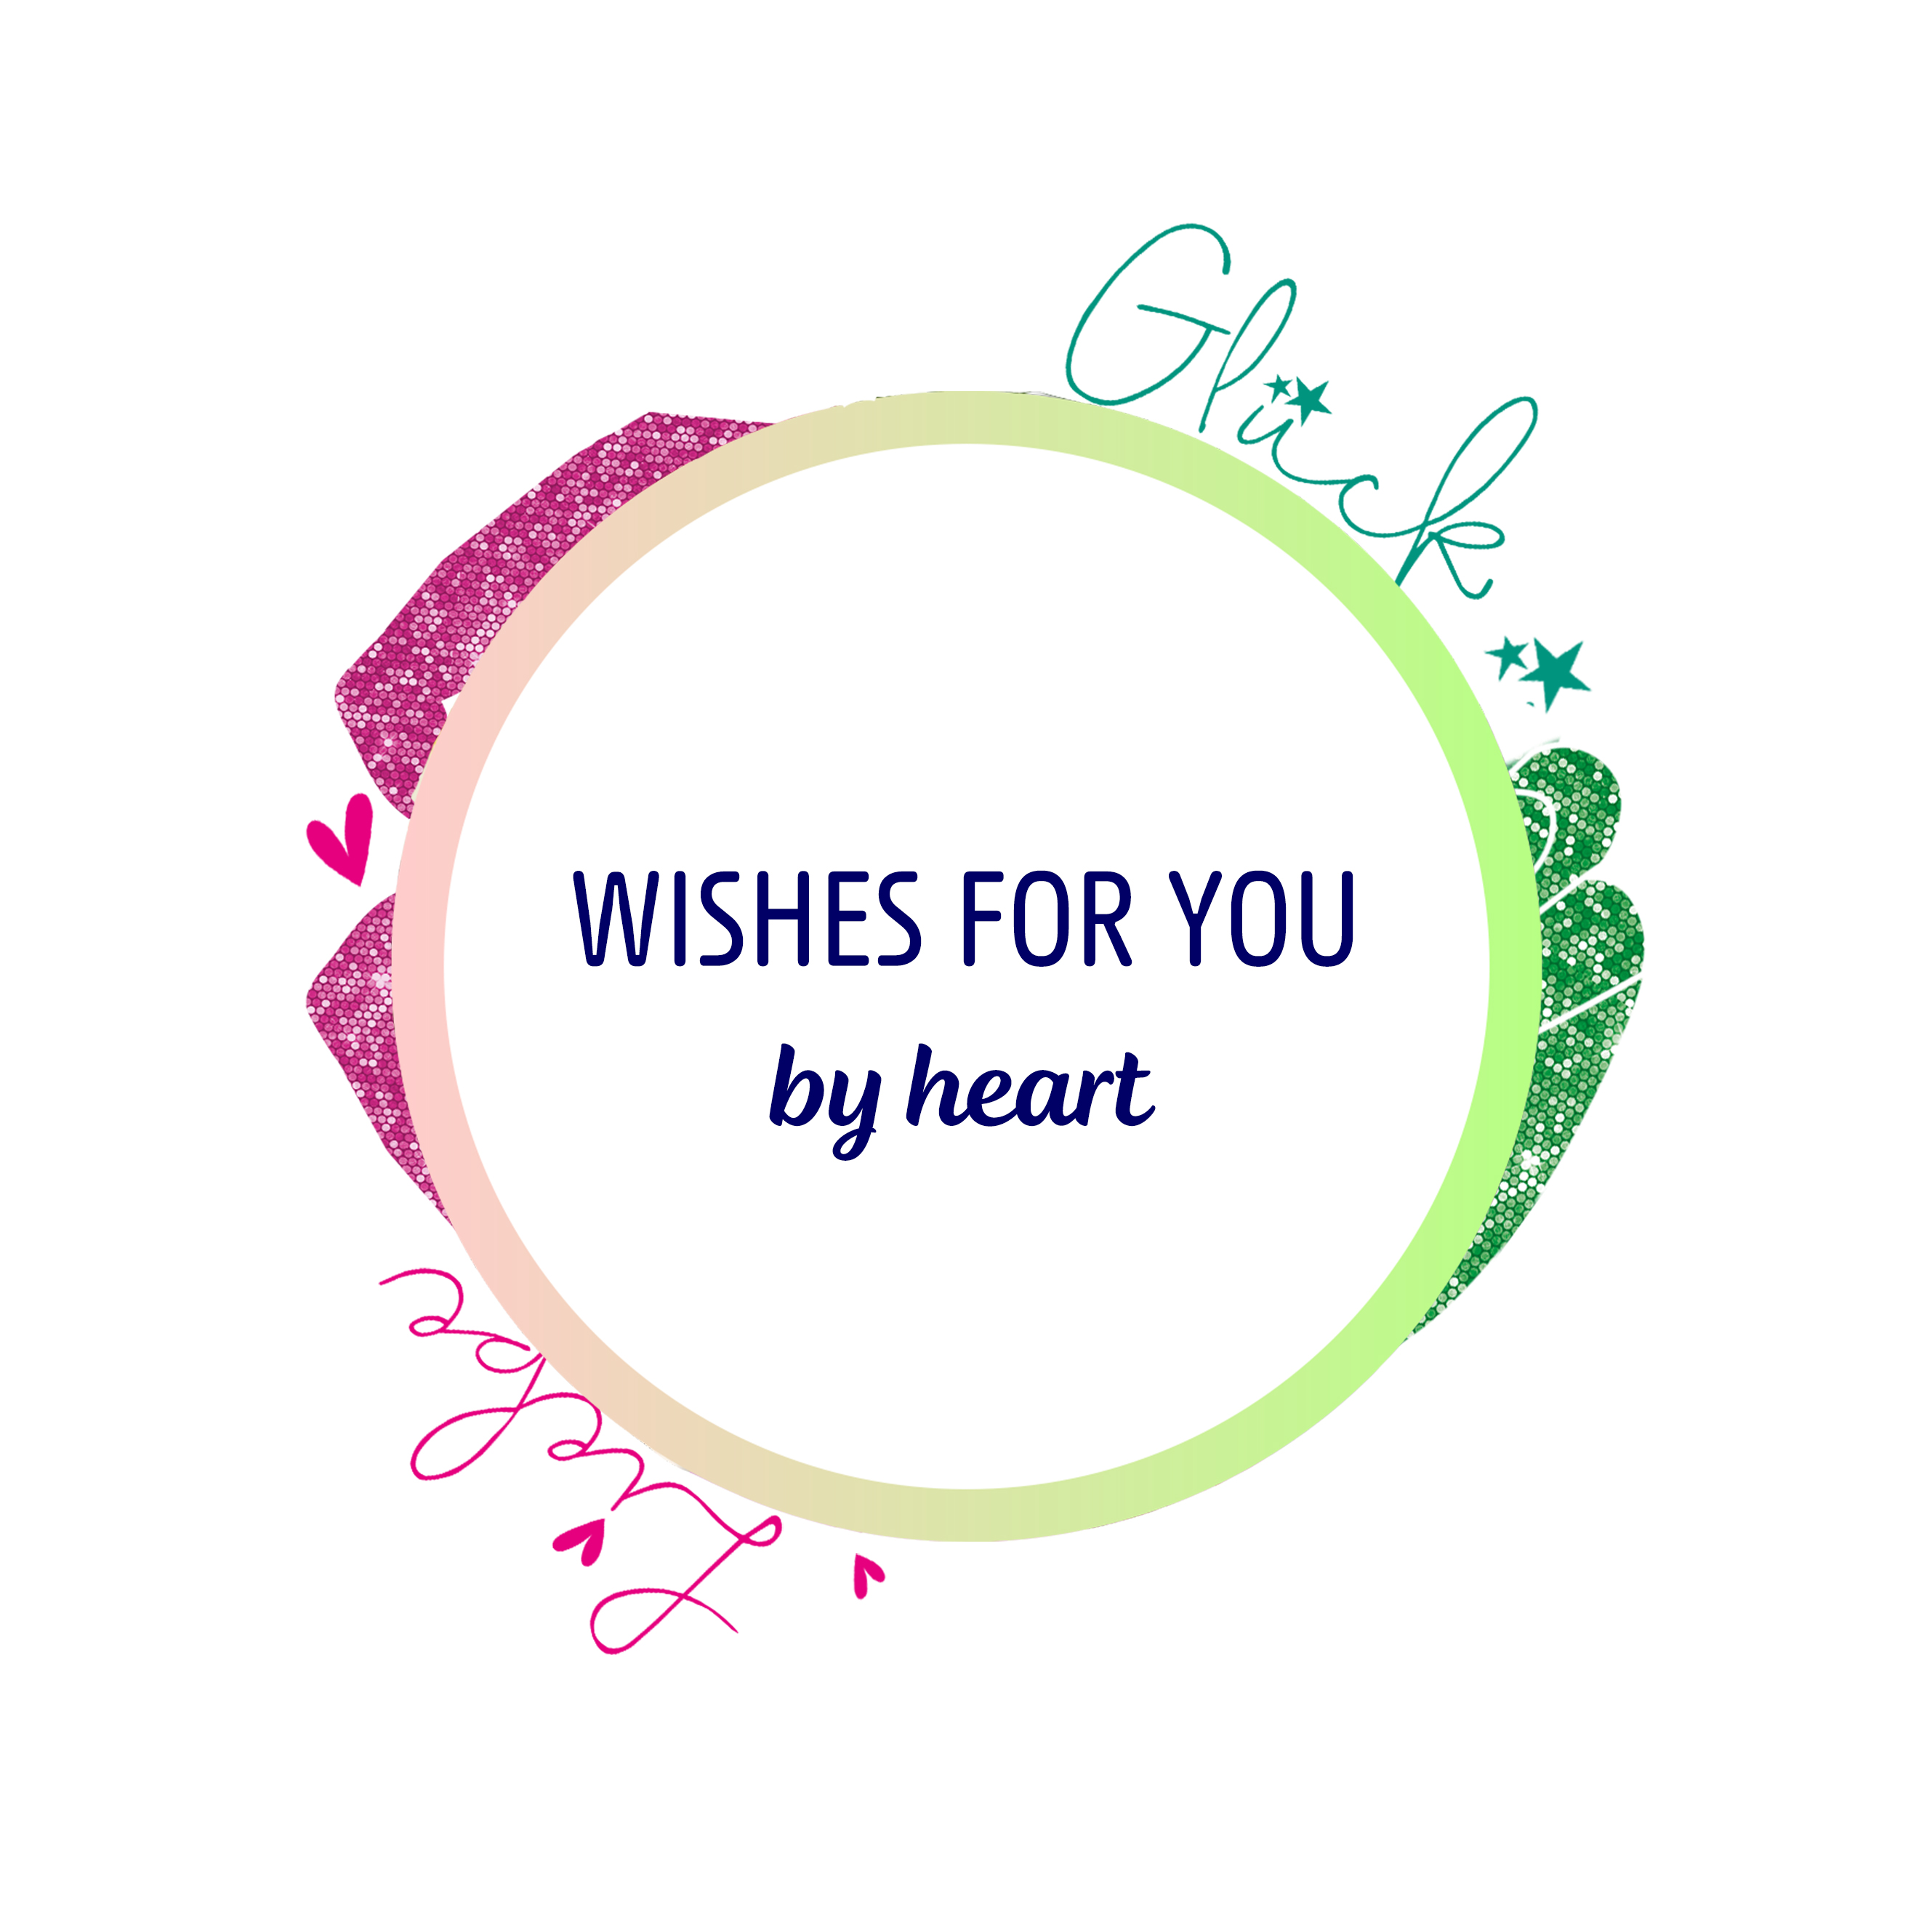 Wishes for you